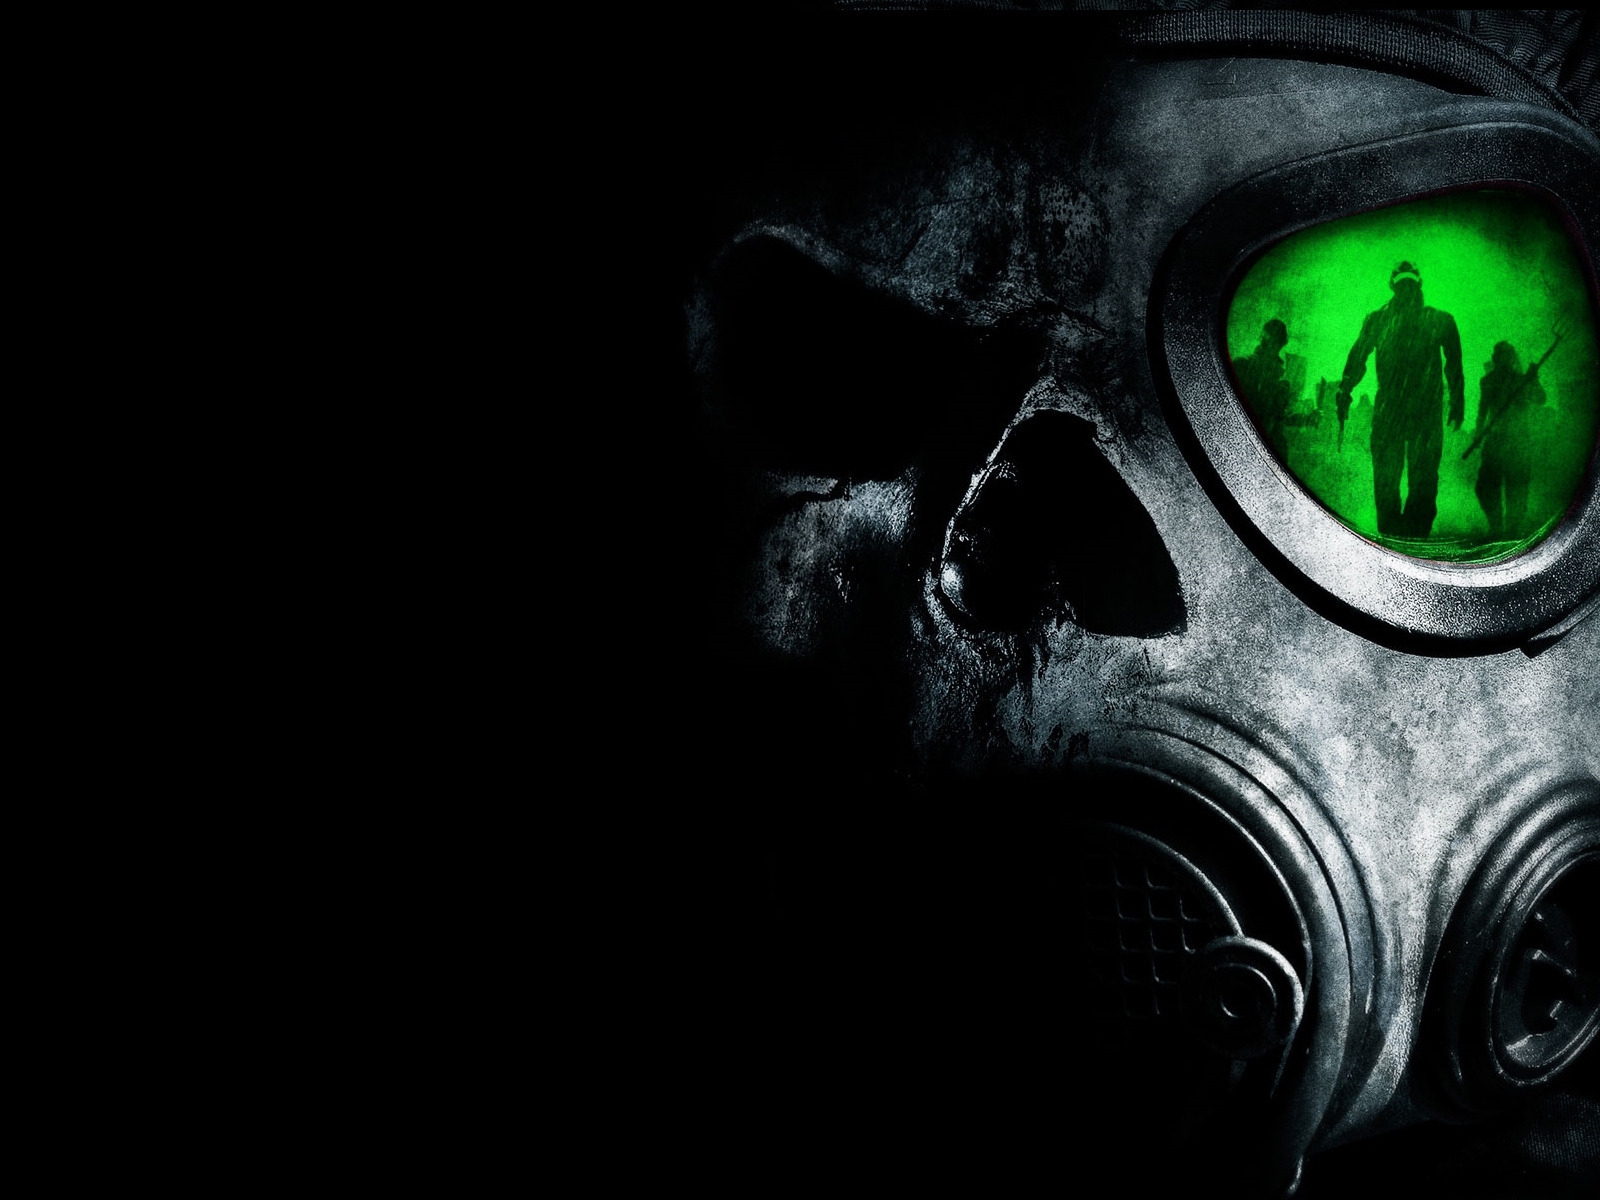 Gas Mask for 1600 x 1200 resolution